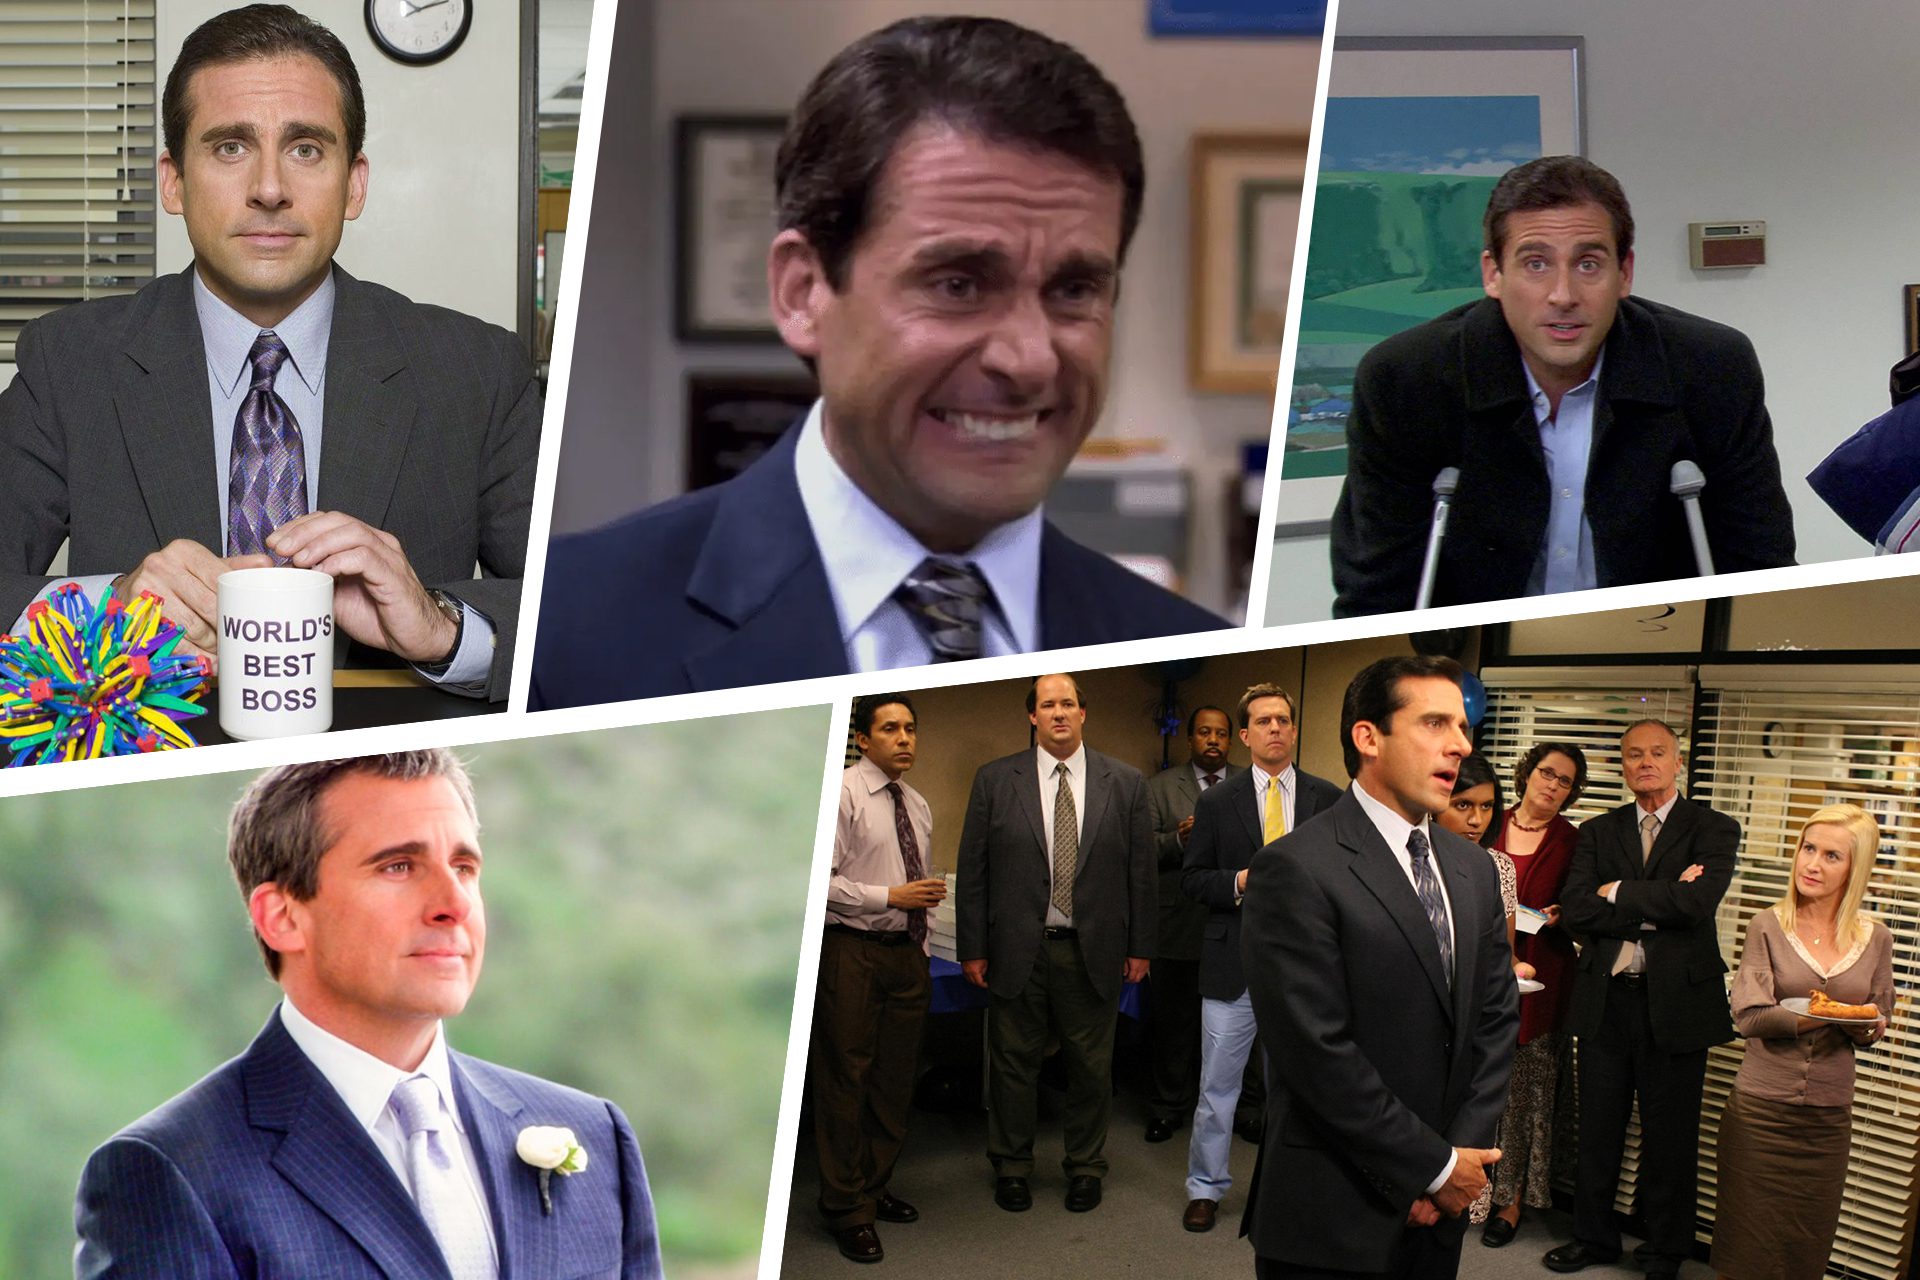 Best Michael Scott Quotes: Top Quotes From The Office Character